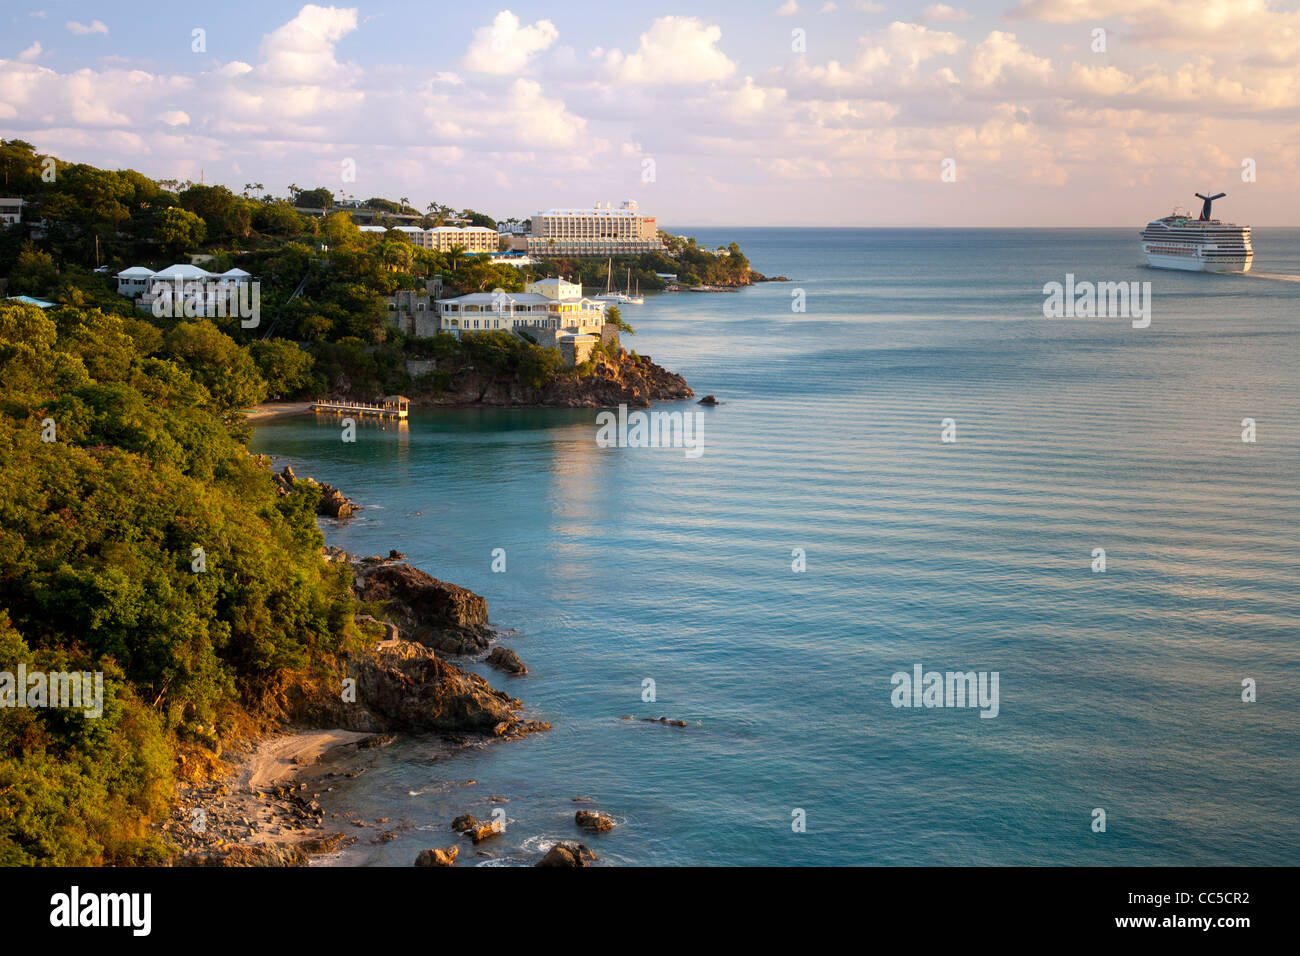 Cruise ship sails past Resort hotels in the setting sunlight along the coast of St Thomas, US Virgin Islands Stock Photo